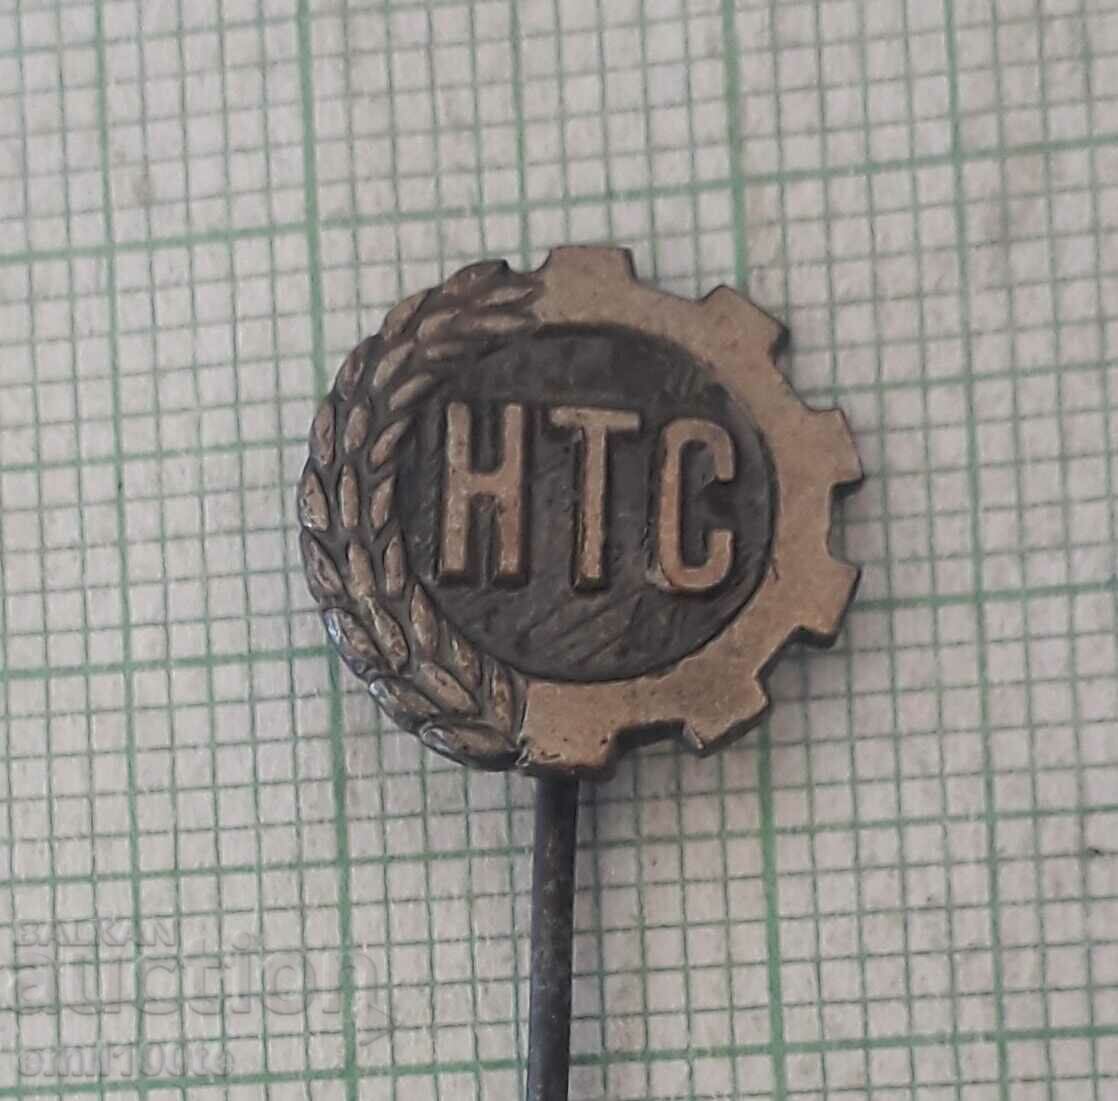 Badge - NTS Scientific and Technical Union